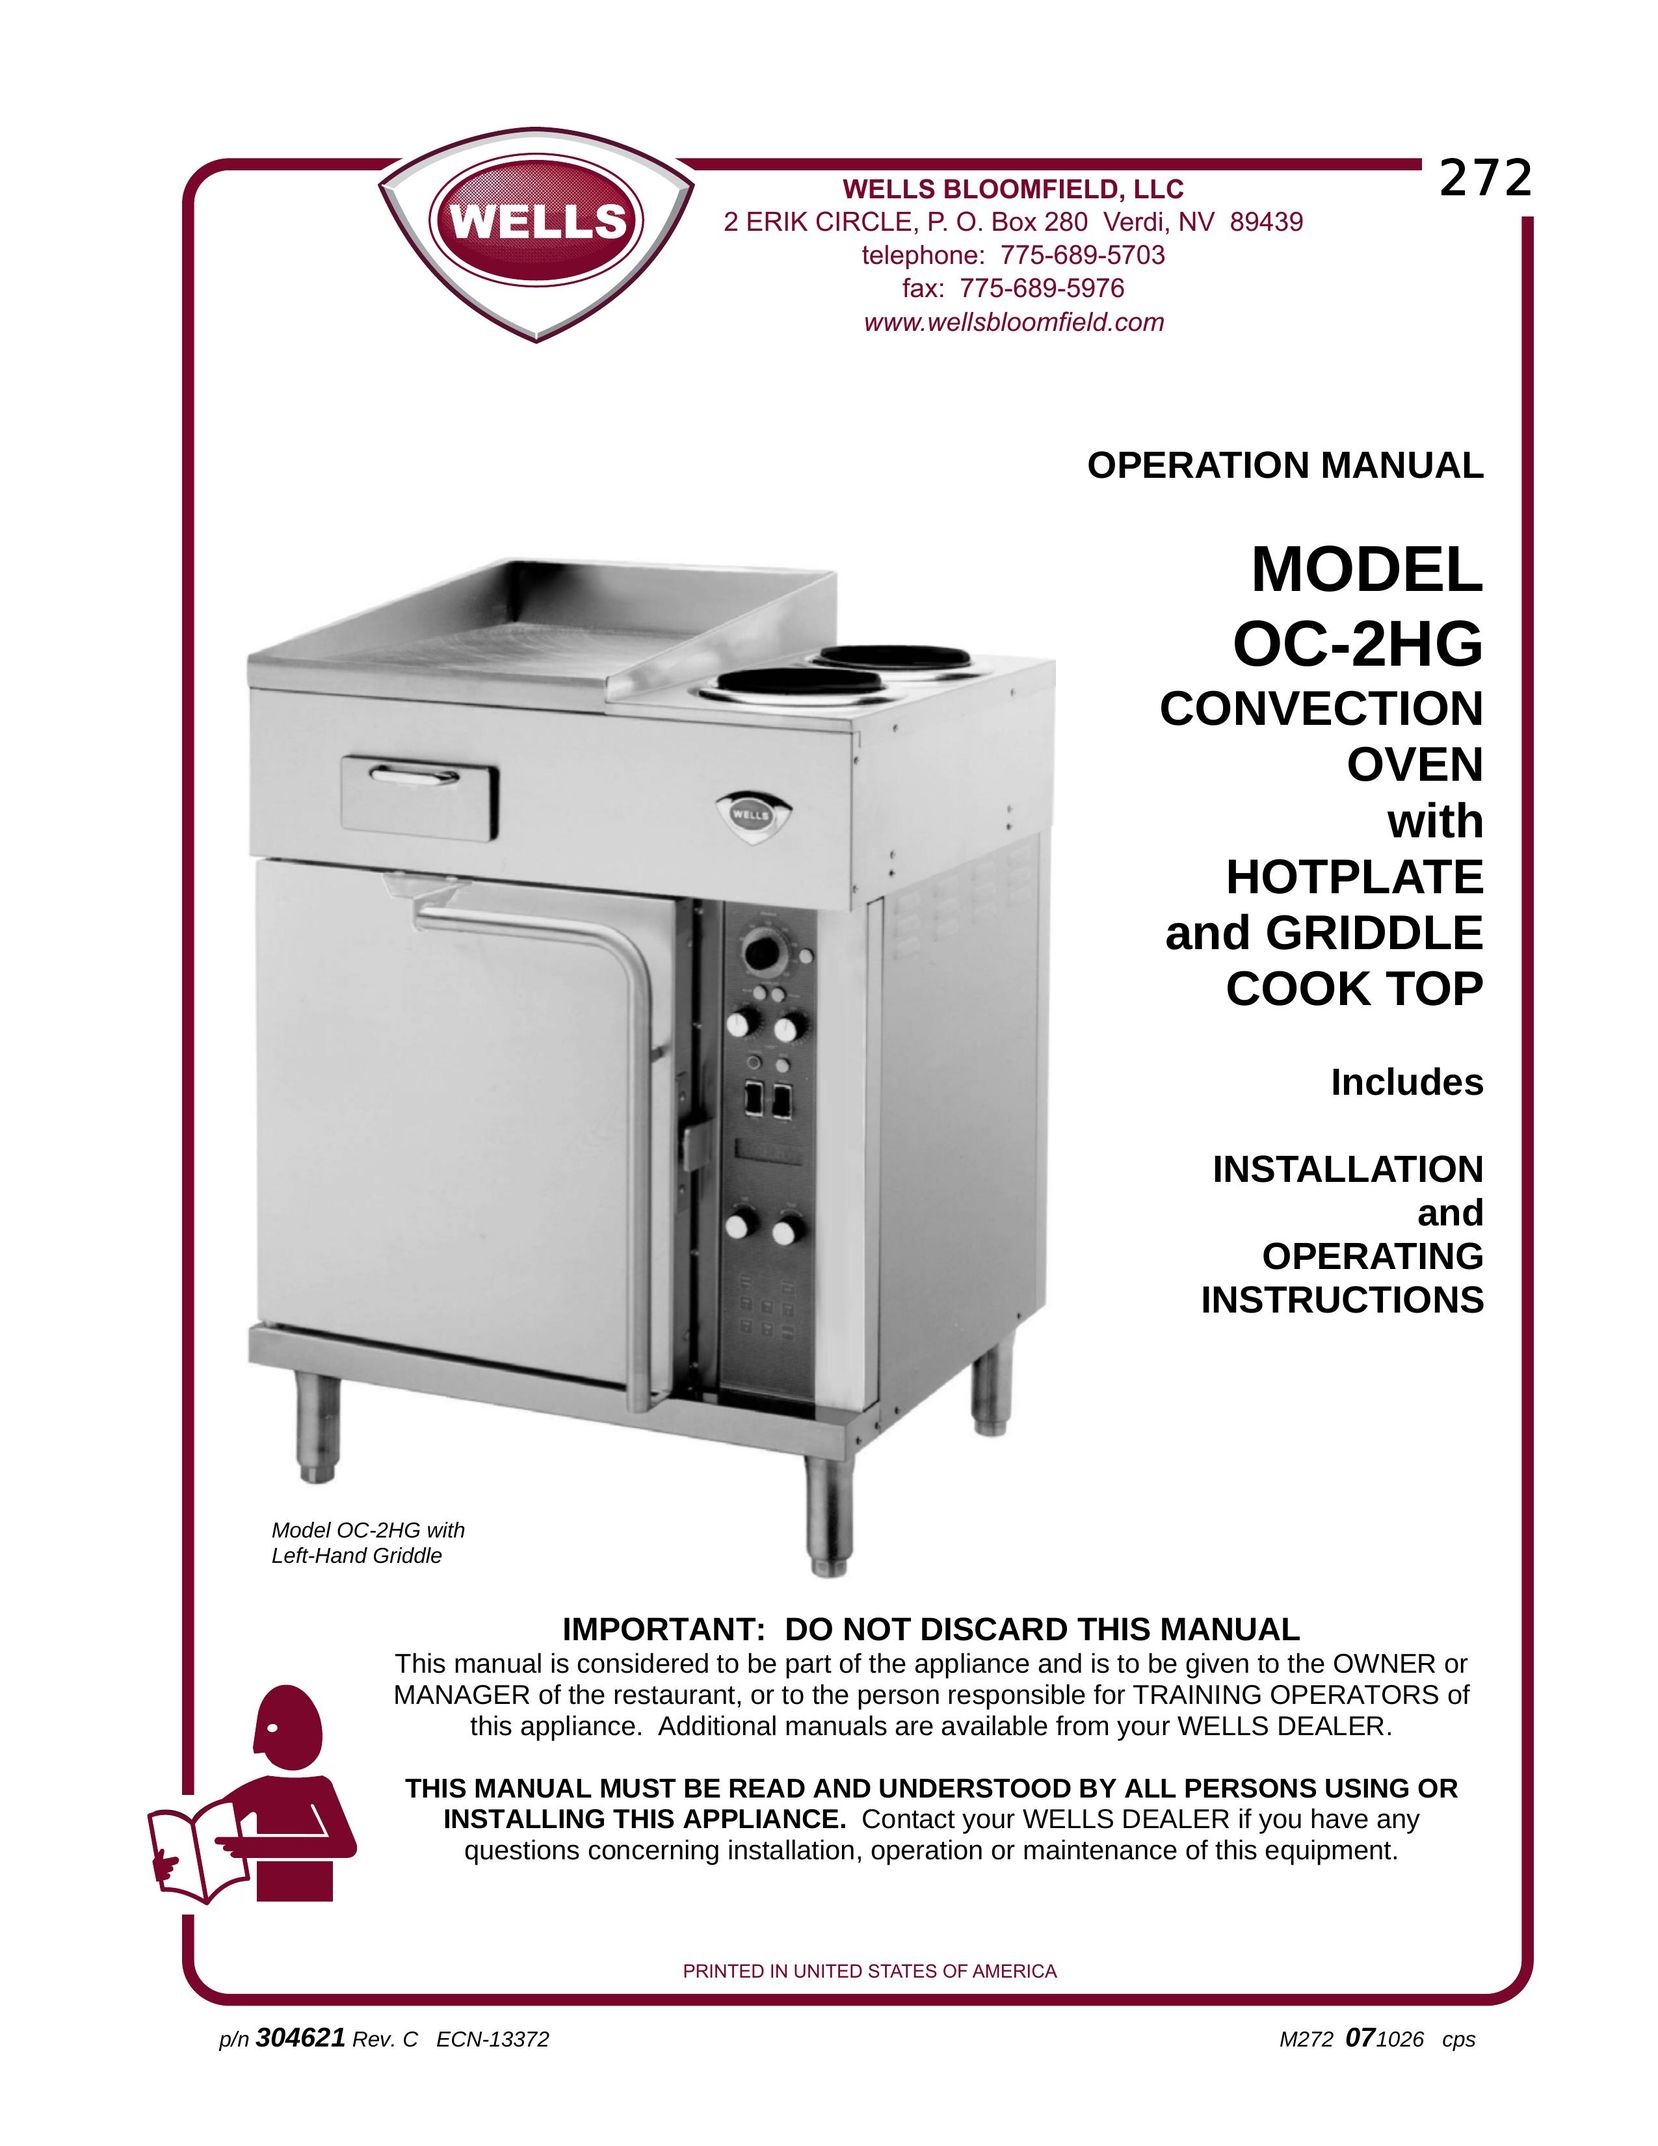 Wells OC-2HG Convection Oven User Manual